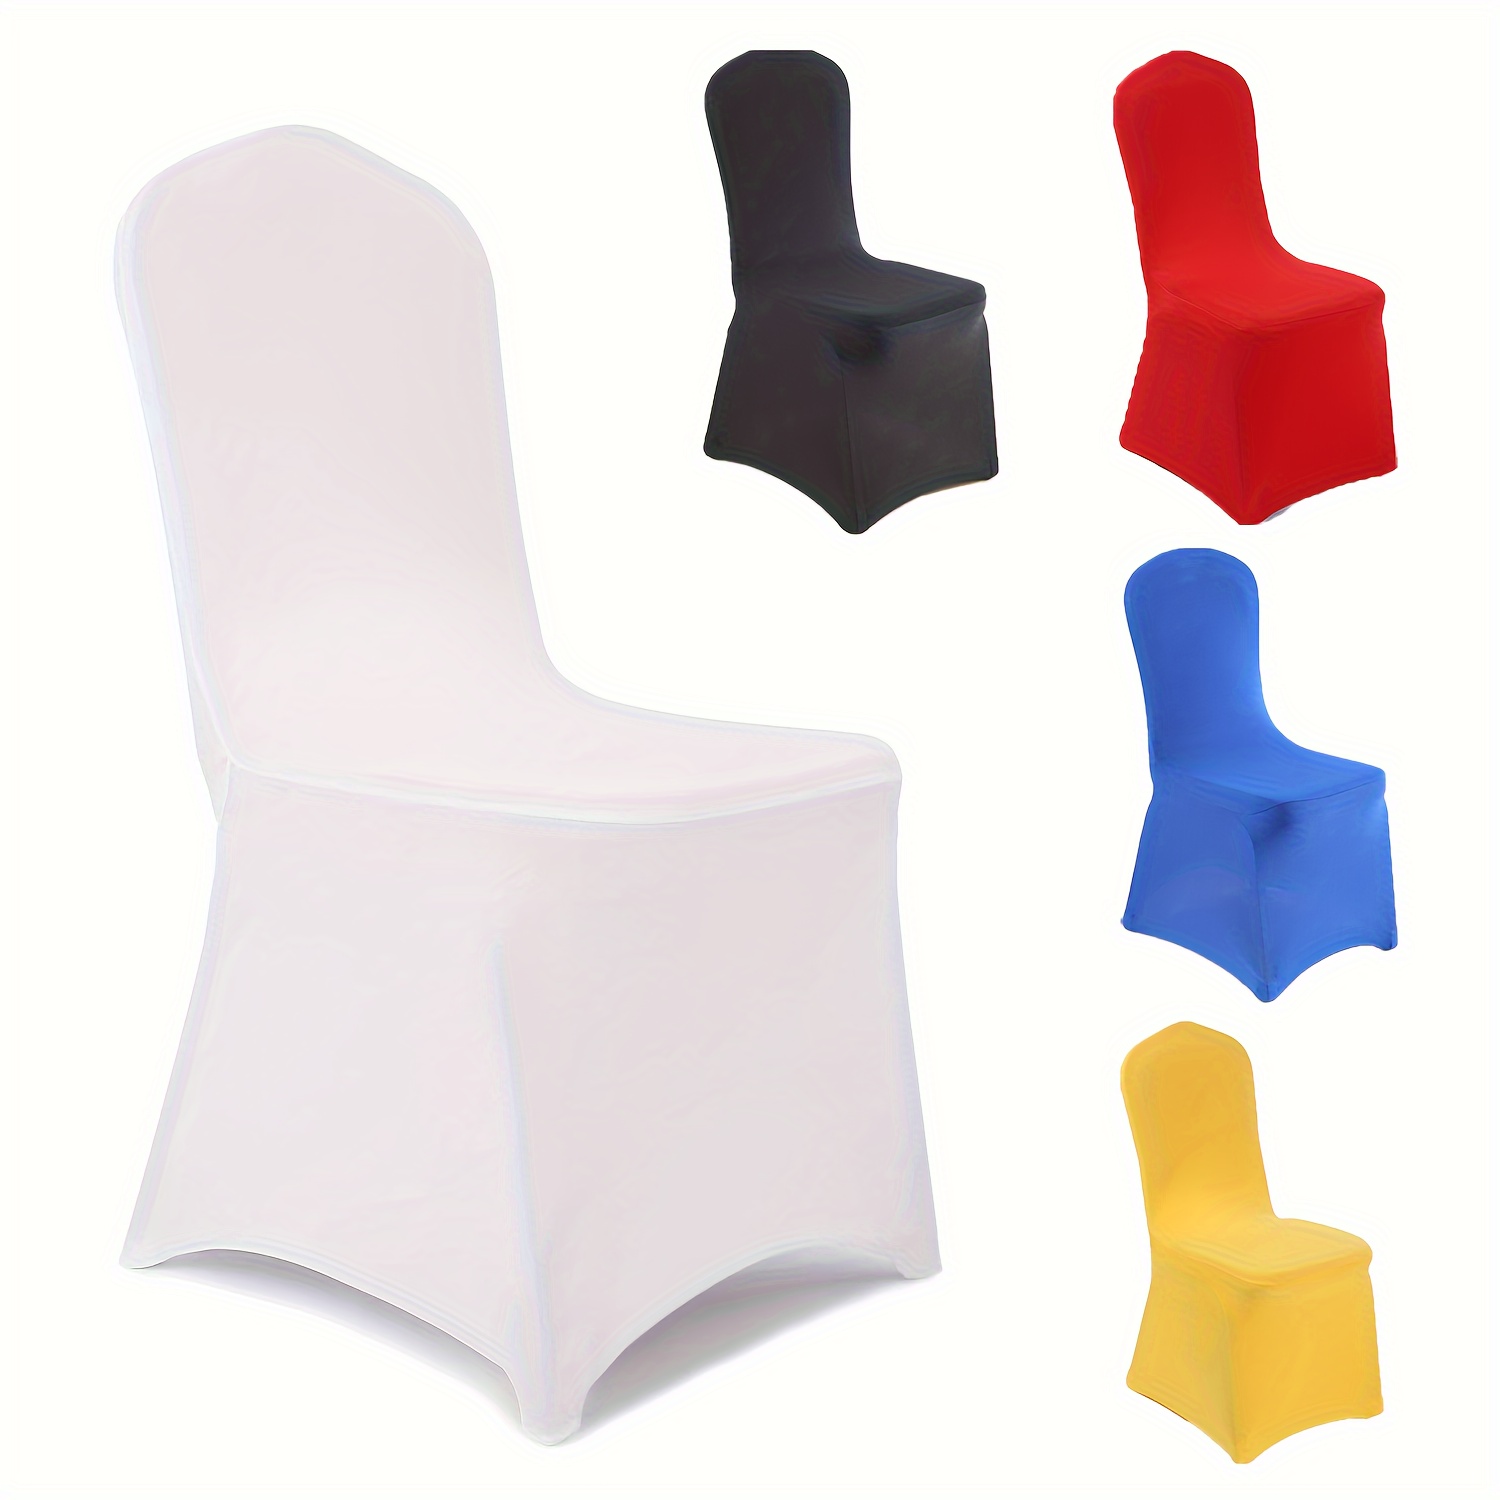 Lycra Chair Covers for weddings and events Australia